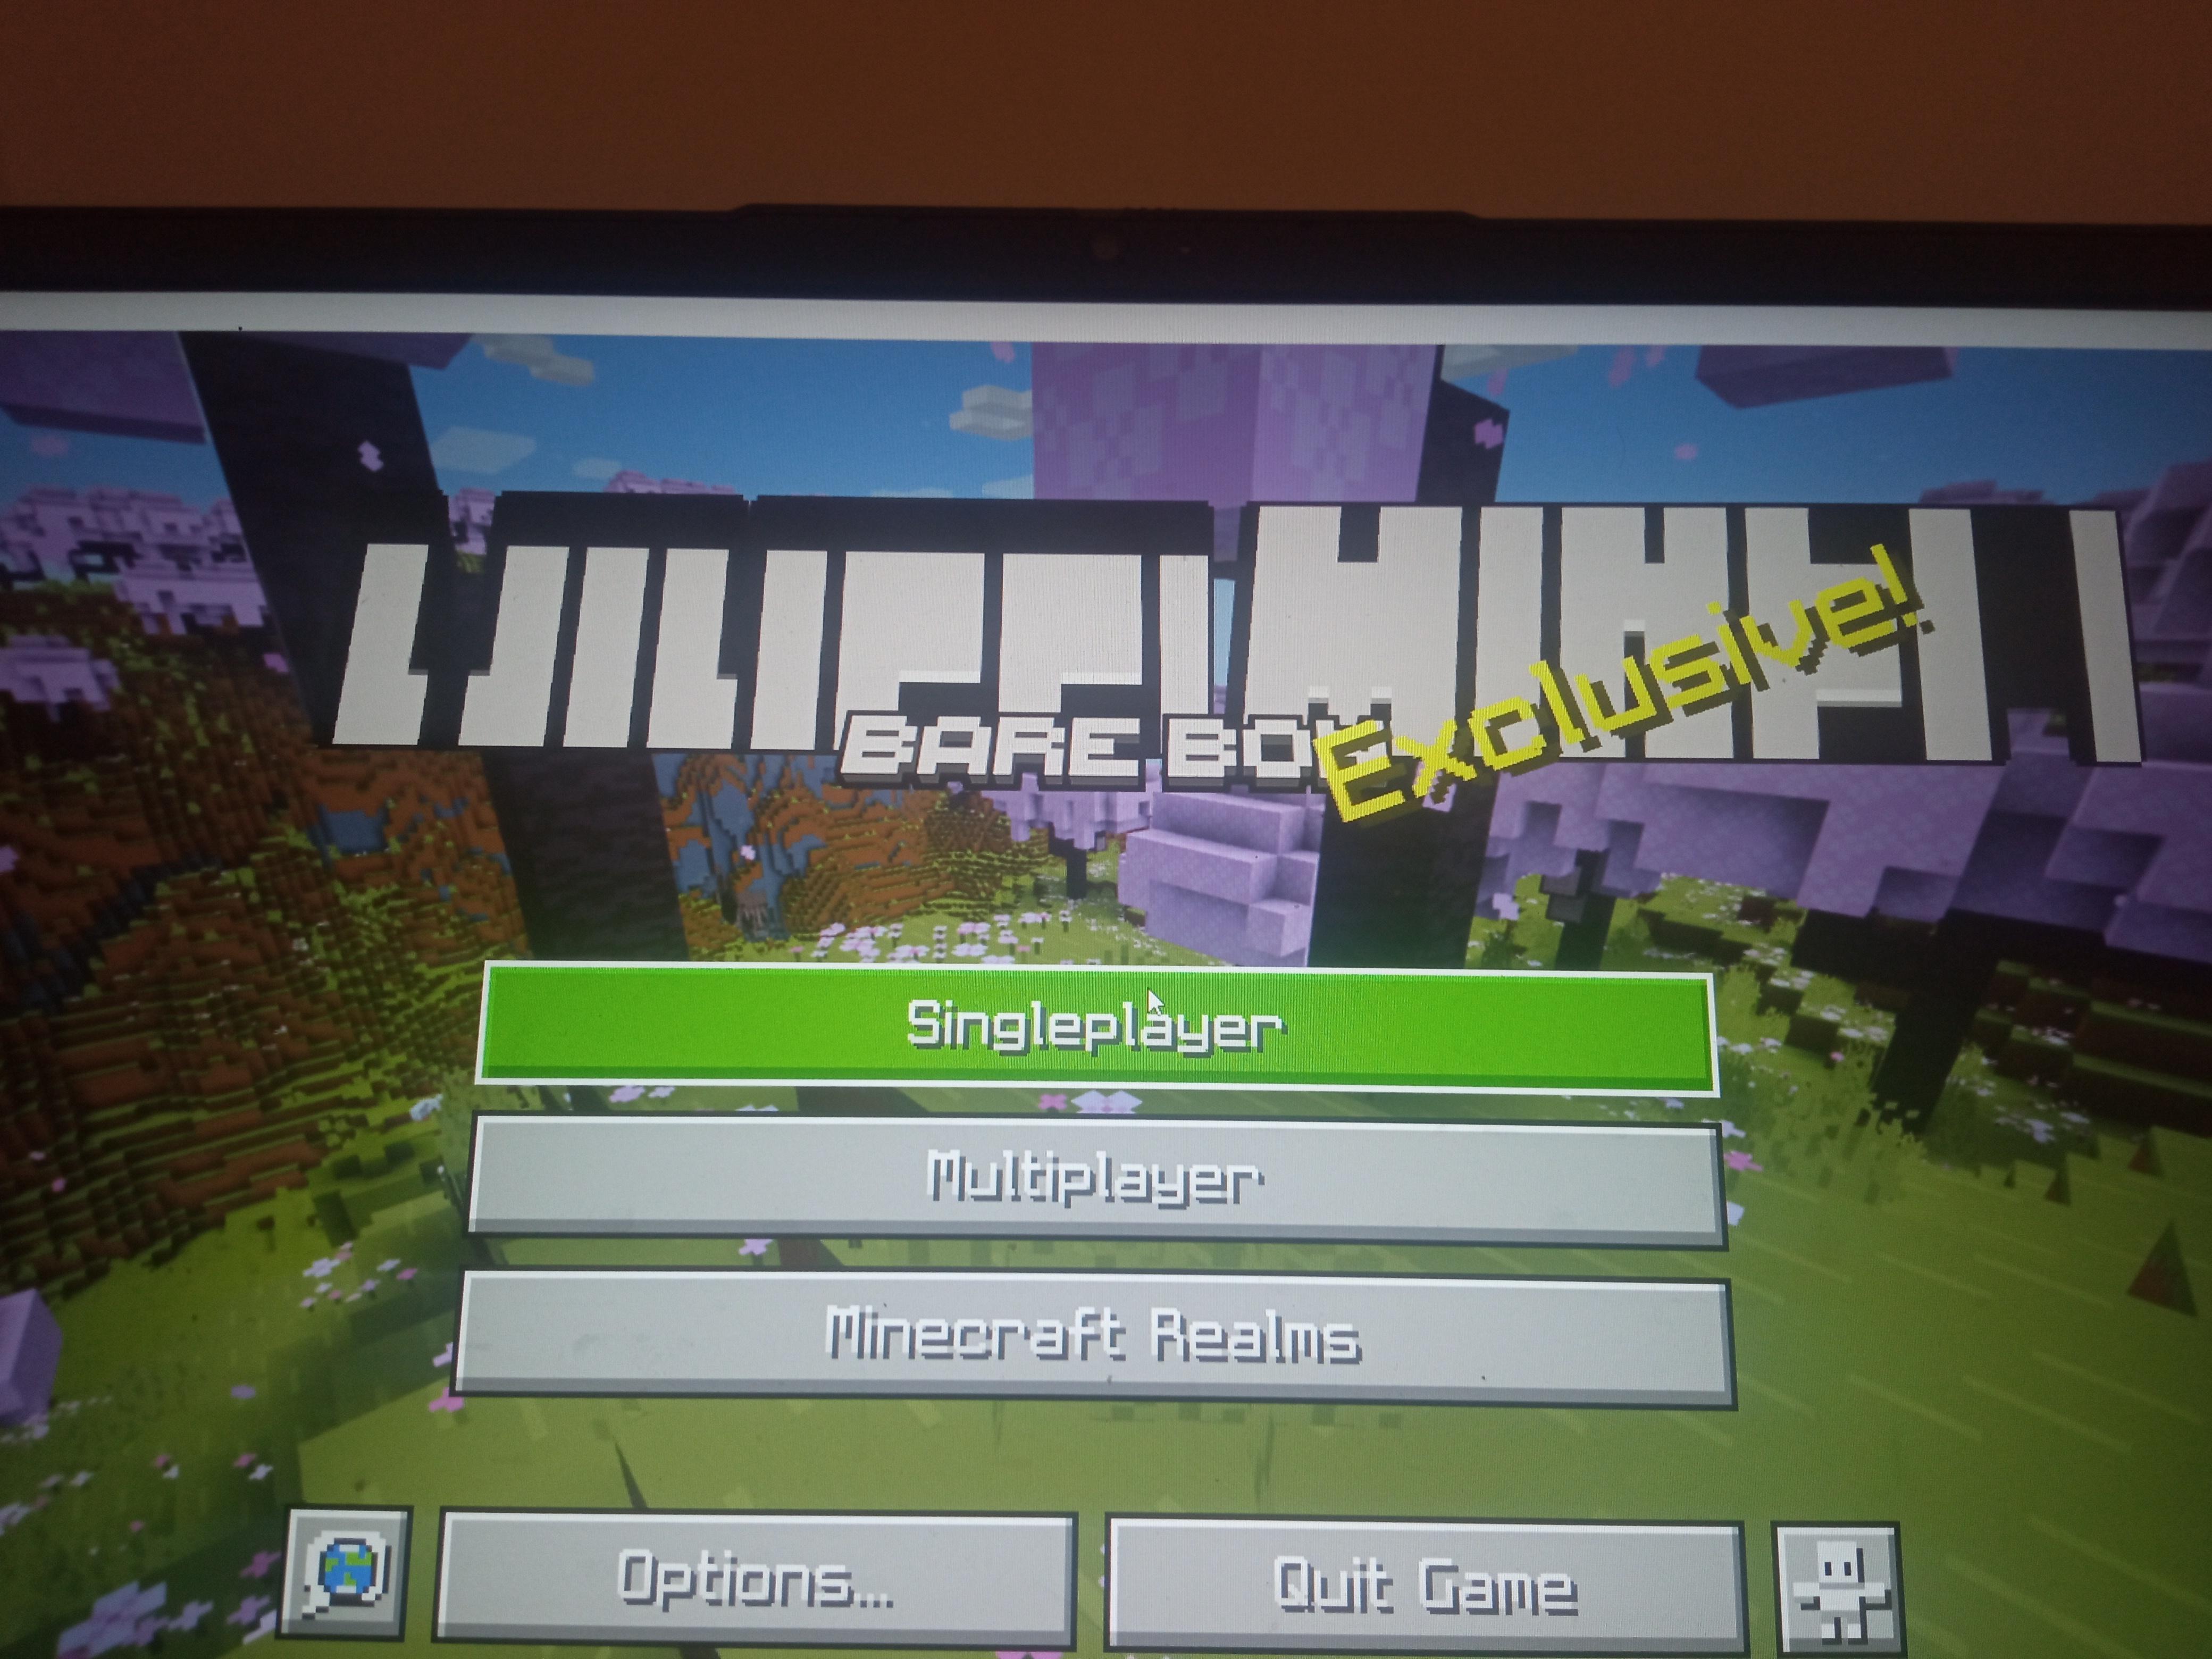 Minecraft Memes - What kind of language is this?